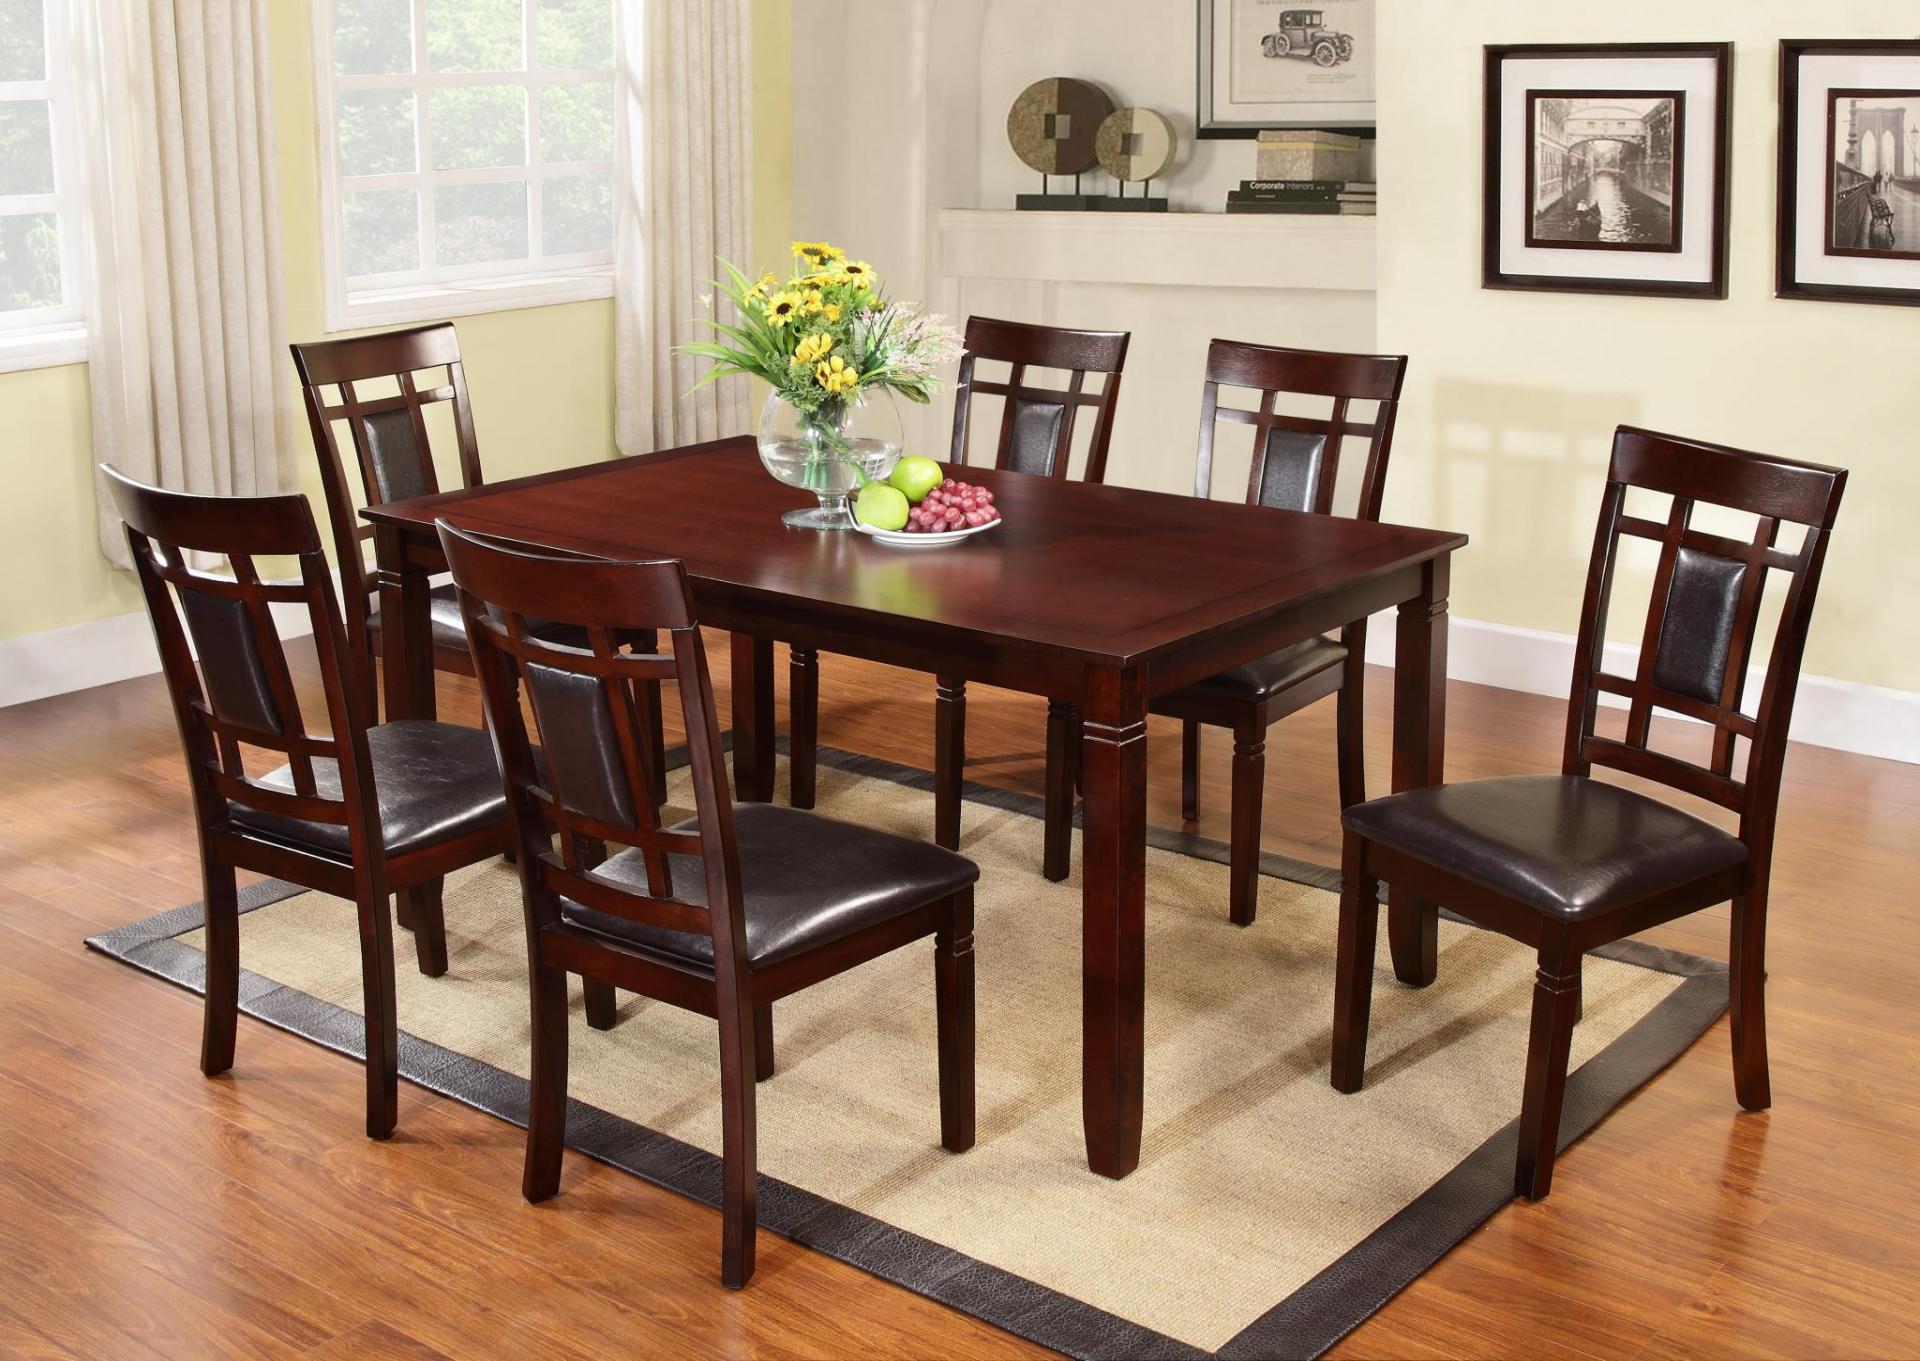  7-PC DINETTE SET, TABLE & 6 CHAIRS 